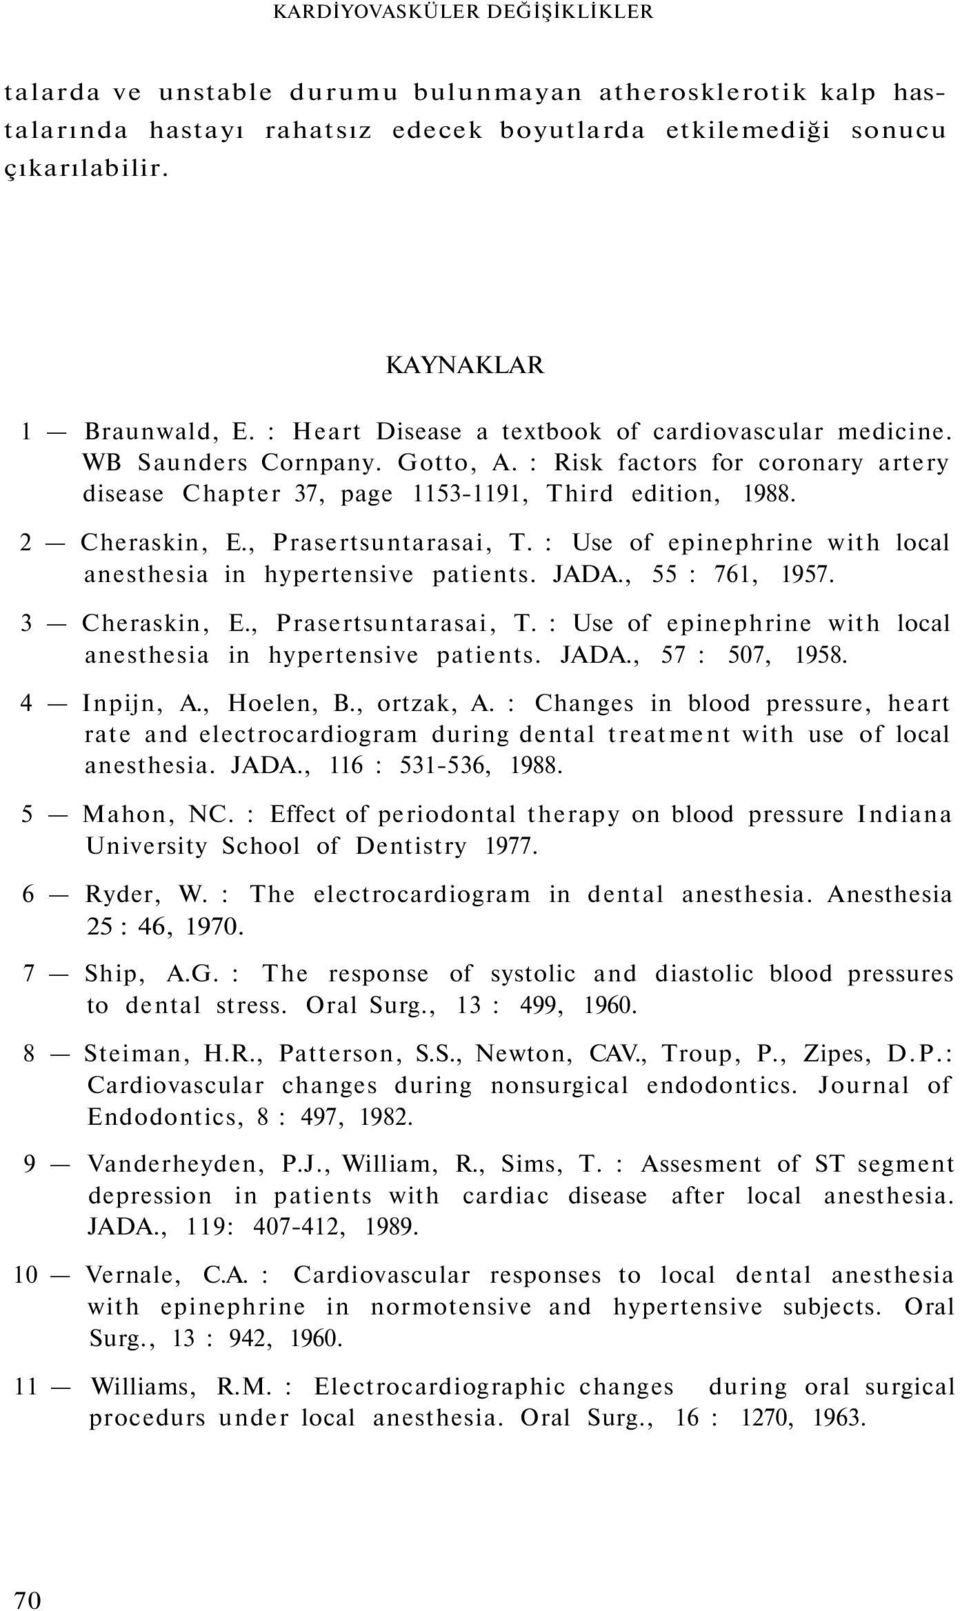 , Prasertsuntarasai, T. : Use of epinephrine with local anesthesia in hypertensive patients. JADA., 55 : 761, 1957. 3 Cheraskin, E., Prasertsuntarasai, T. : Use of epinephrine with local anesthesia in hypertensive patients. JADA., 57 : 507, 1958.